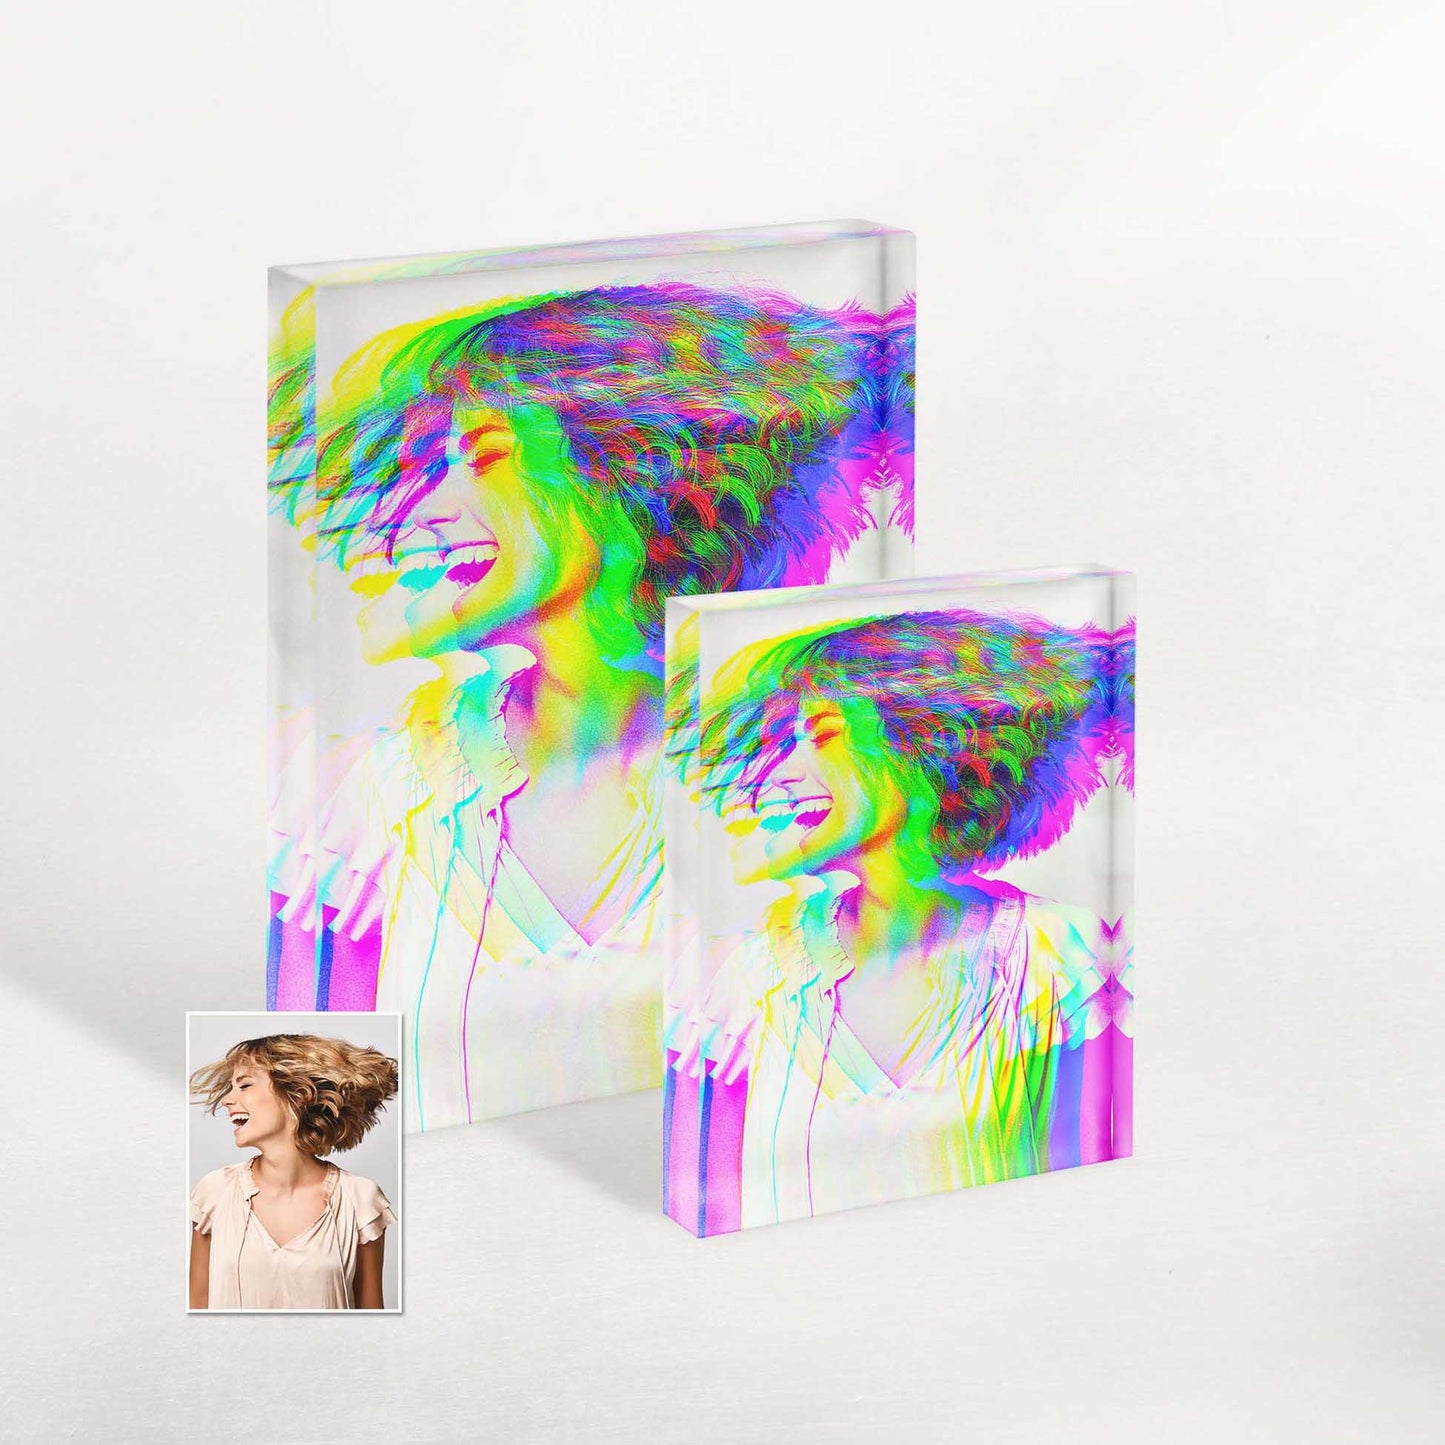 Experience the mesmerizing depth and stunning realism with our Personalized Anaglyph 3D Effect Acrylic Block Photo. Transform your cherished memories into an immersive work of art that adds a touch of uniqueness and creativity to your home